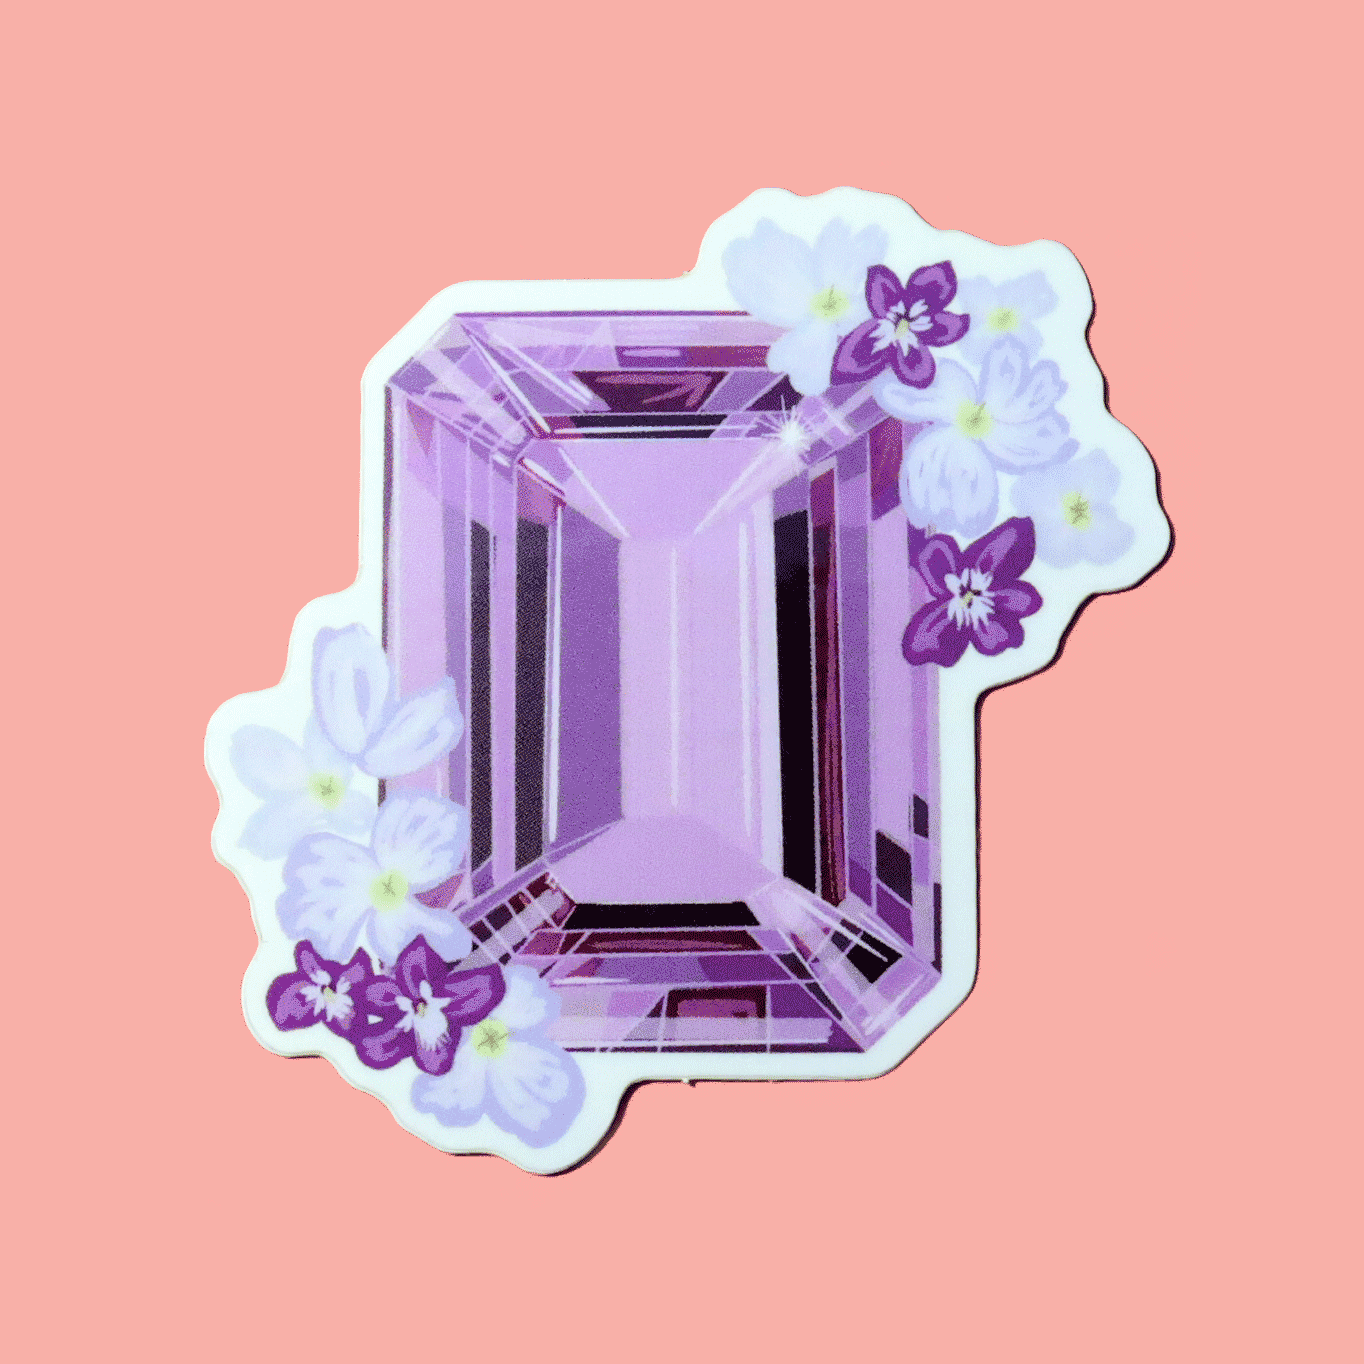 Sticker showcasing an illustrated February birthstone of amethyst and birth flowers of violets and primrose